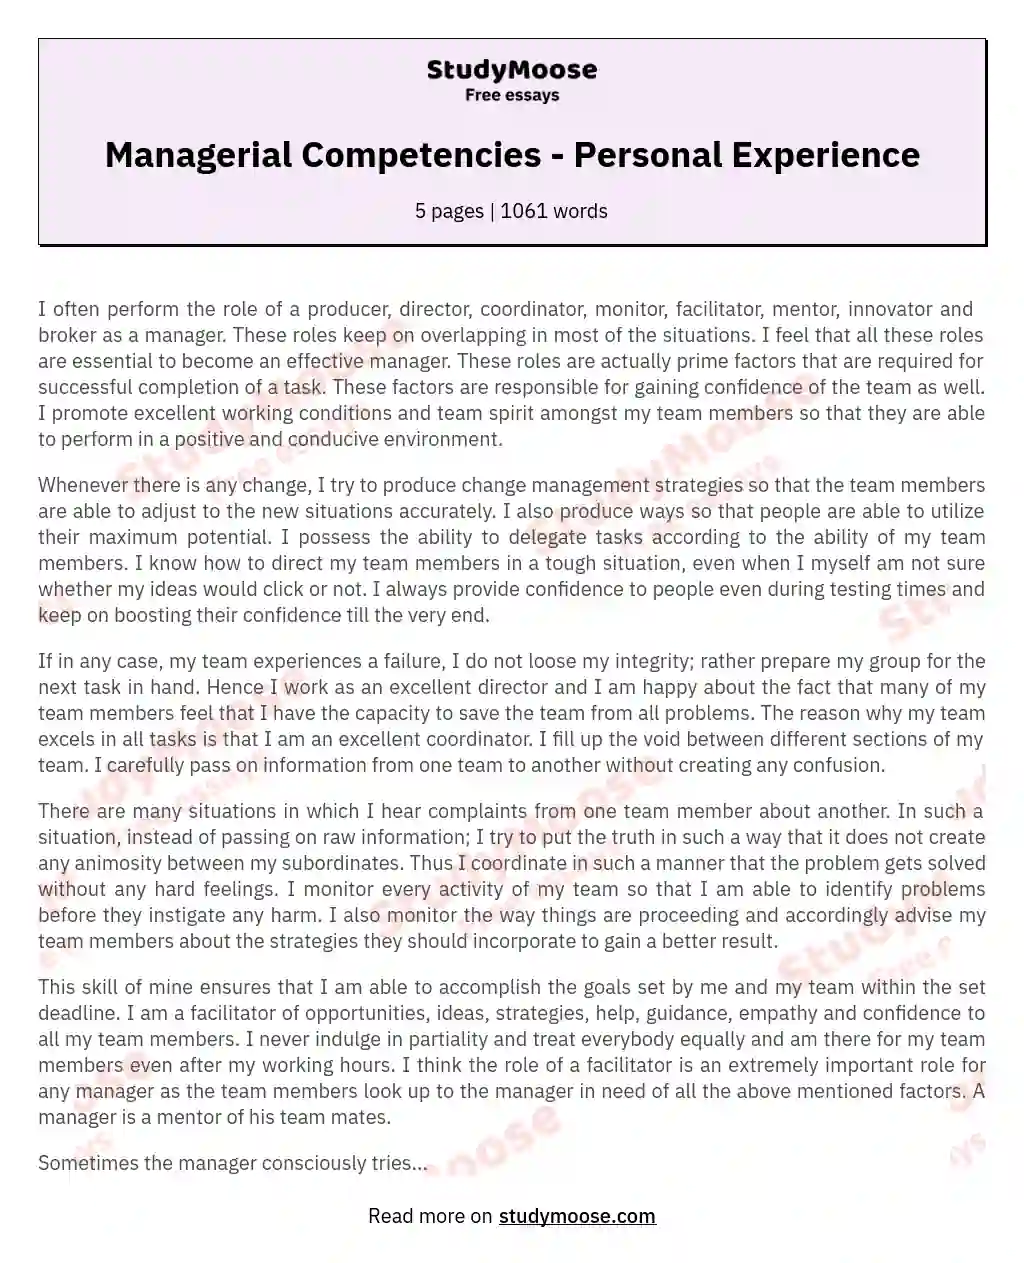 Managerial Competencies - Personal Experience essay